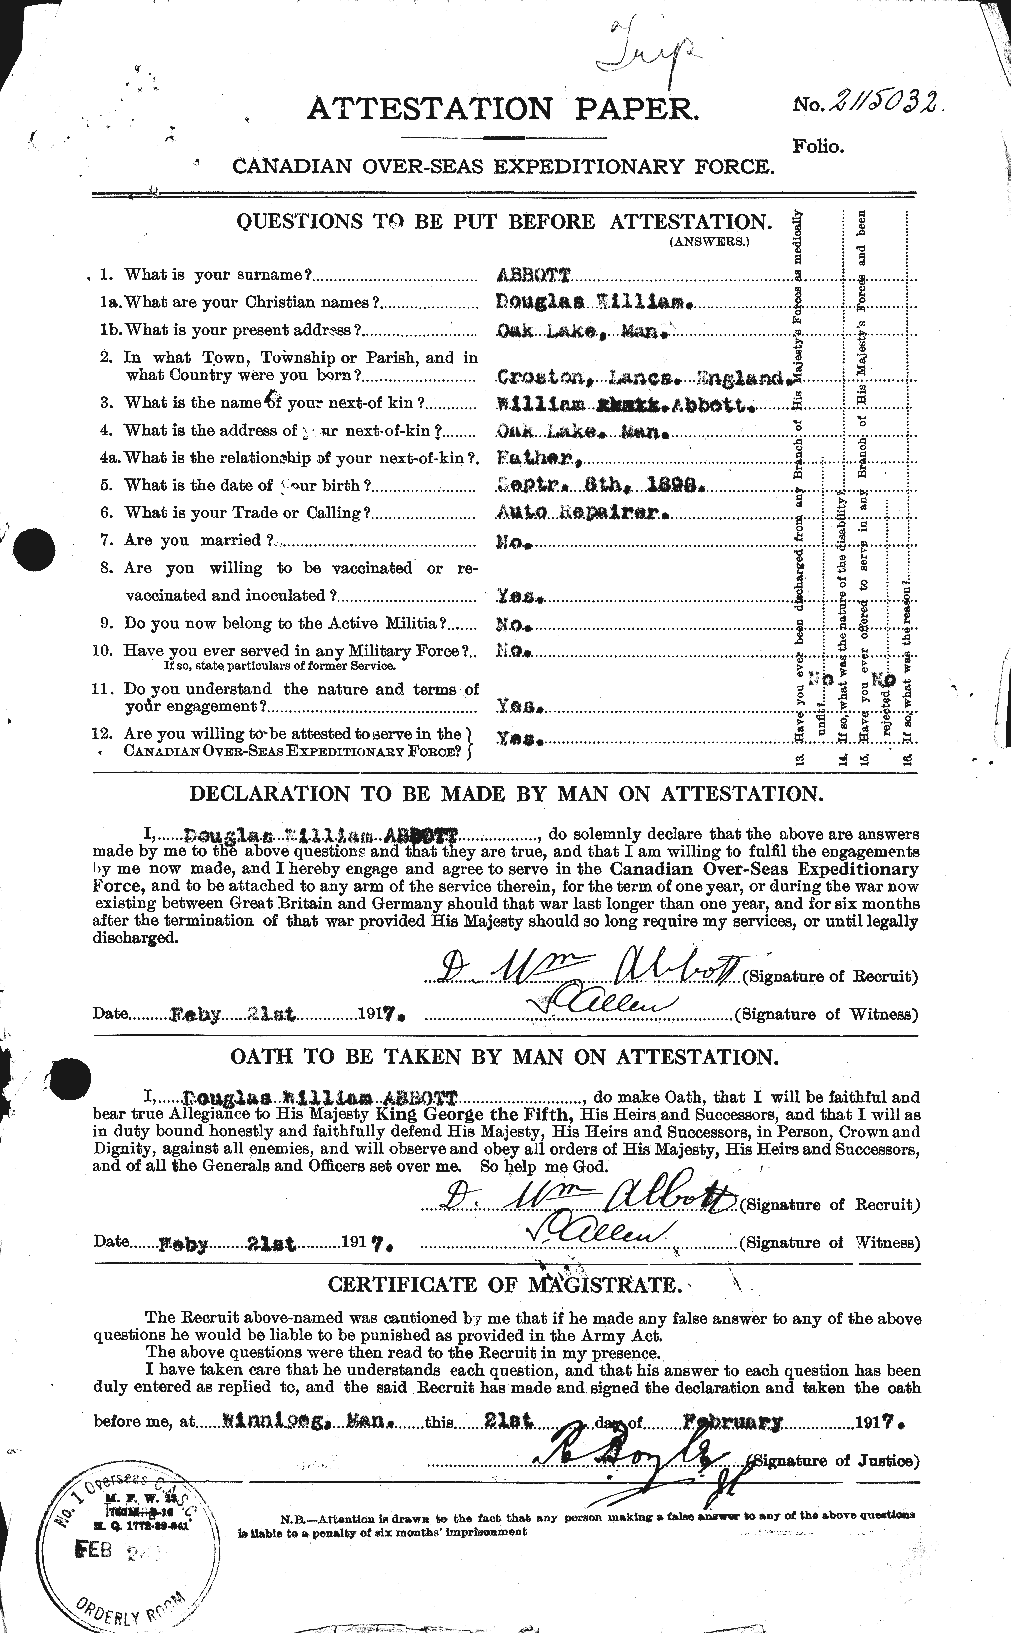 Personnel Records of the First World War - CEF 200904a